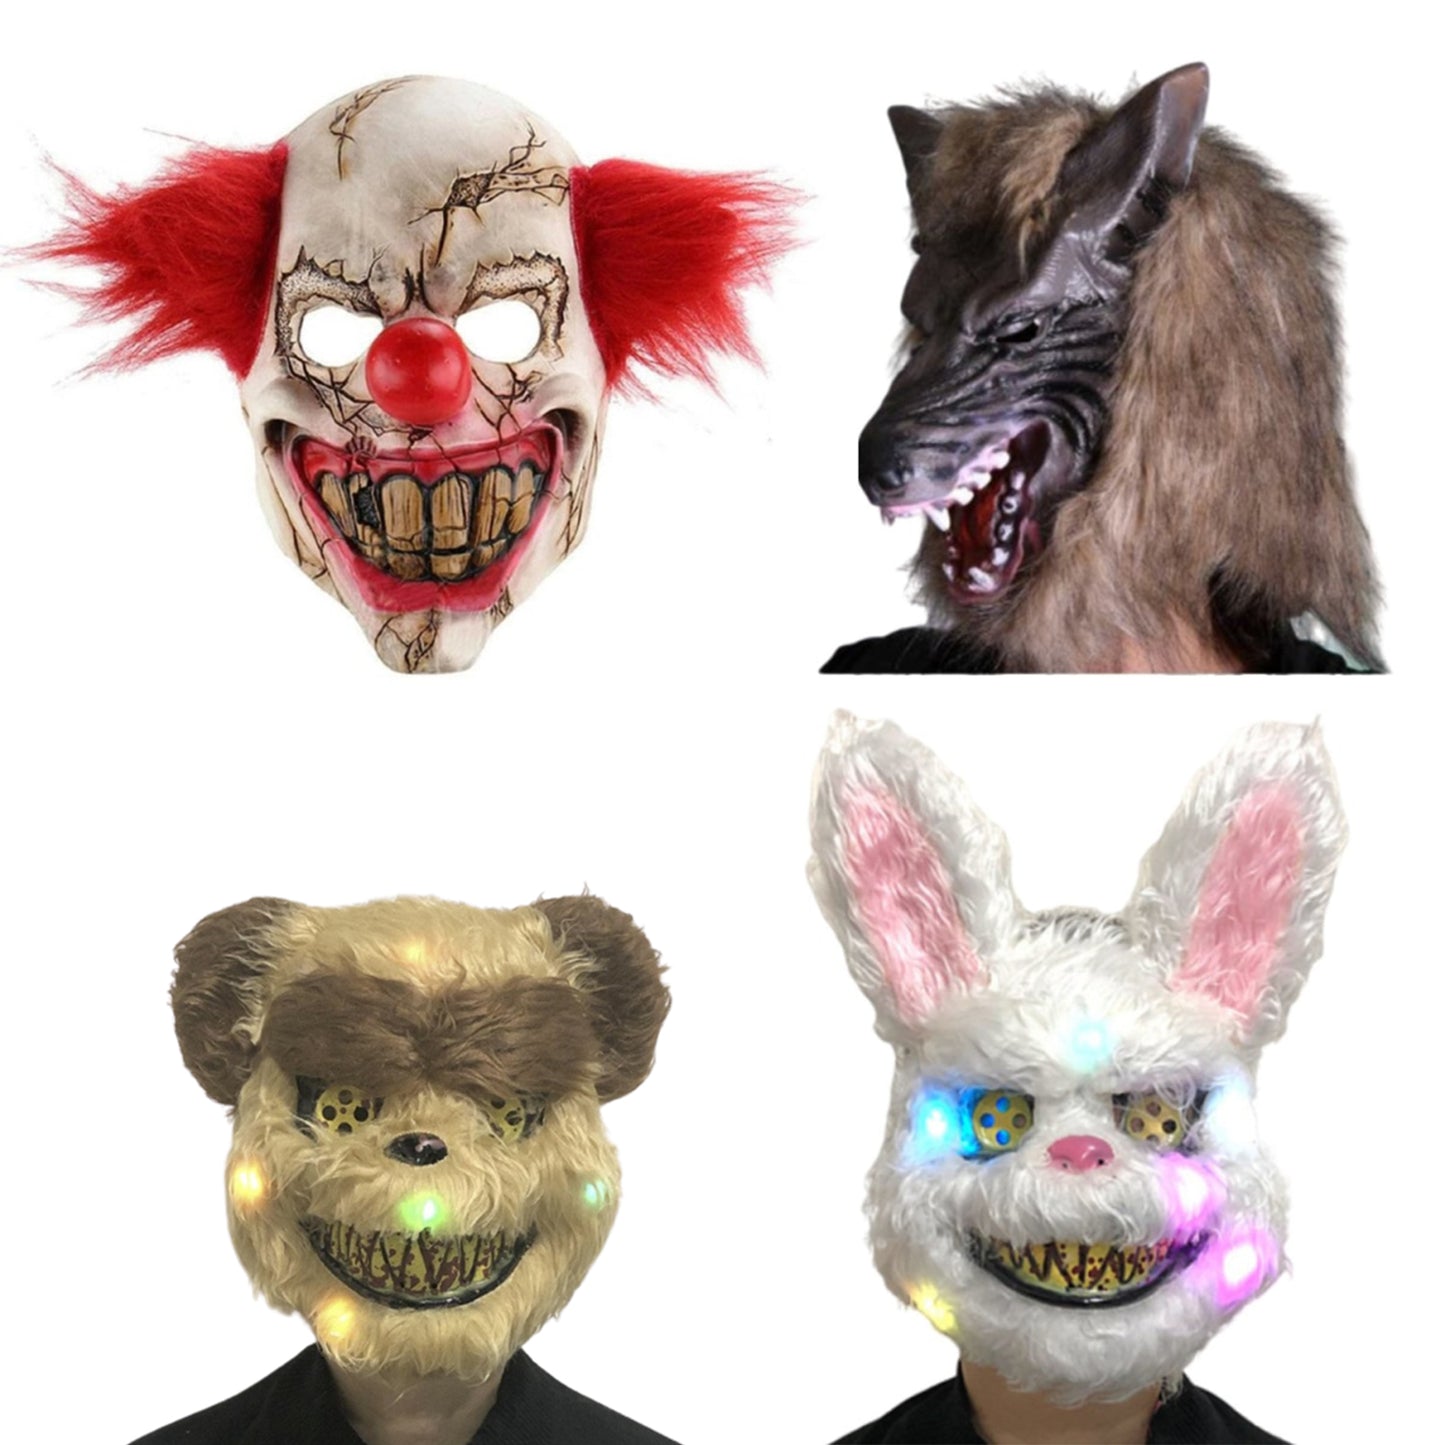 Clown Wolf Teddy Rabbit Animal Mask Horror Scary Halloween Full Face Costume Party